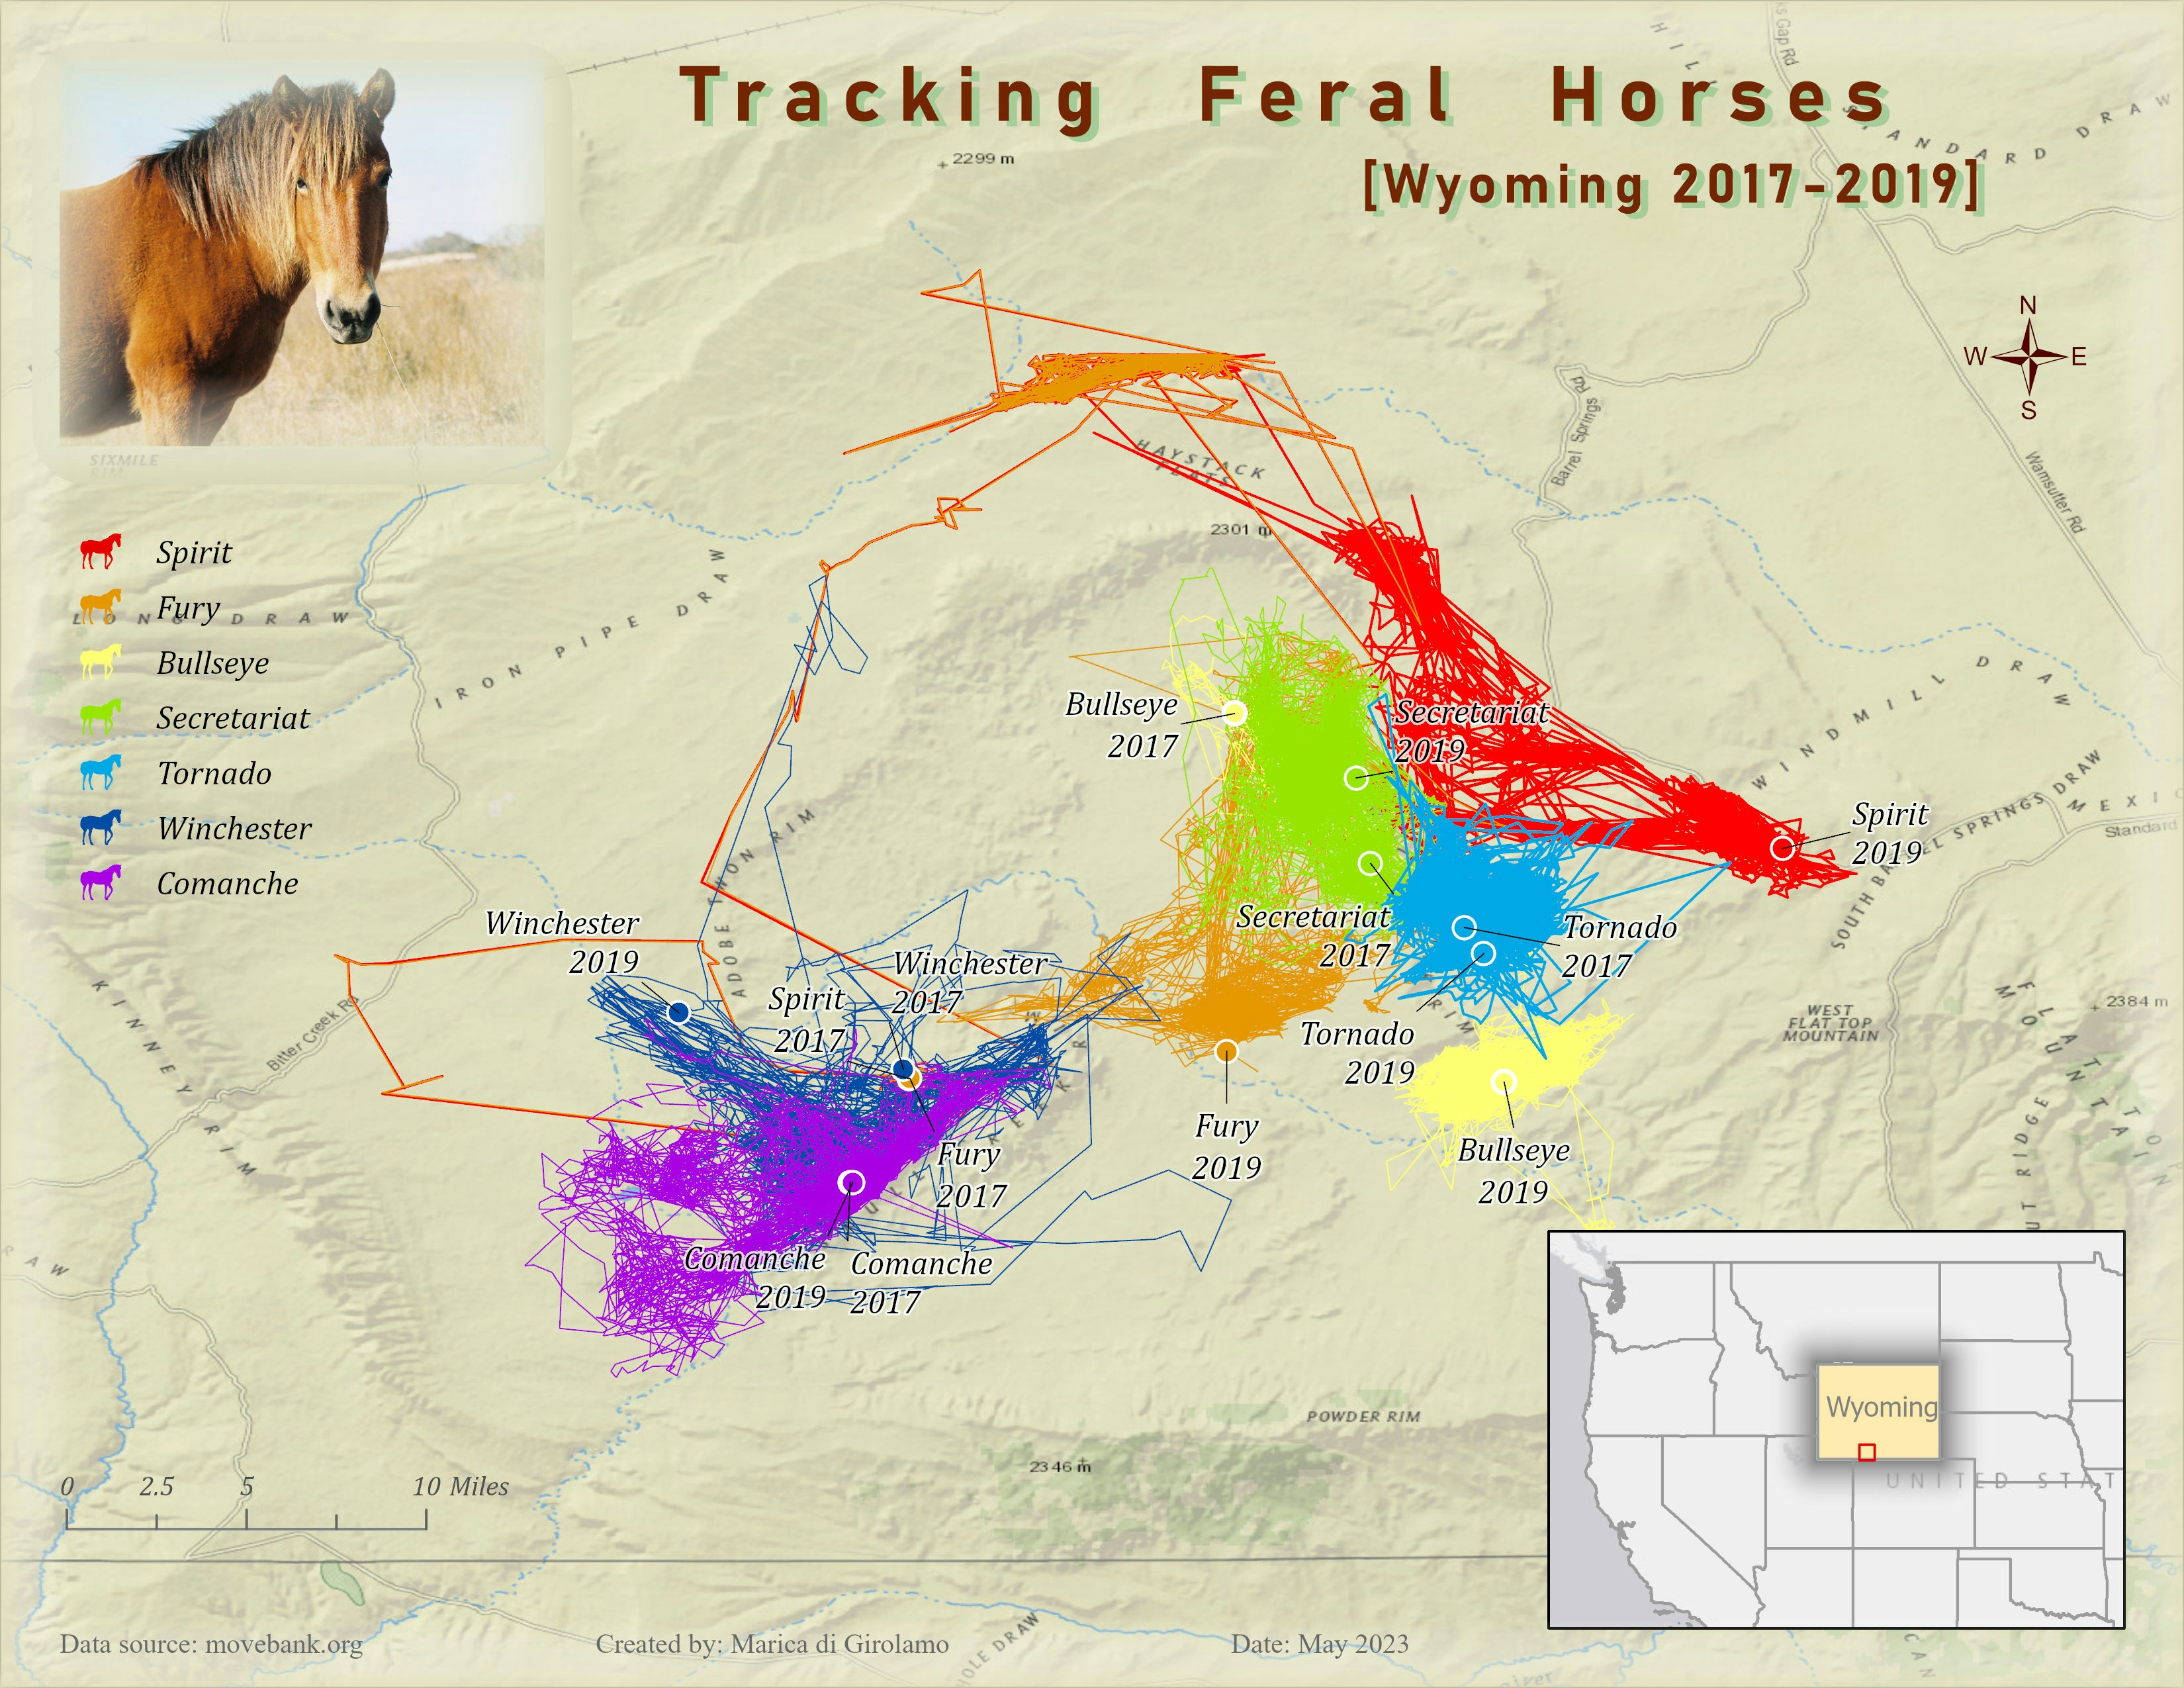 Tracking Feral Horses